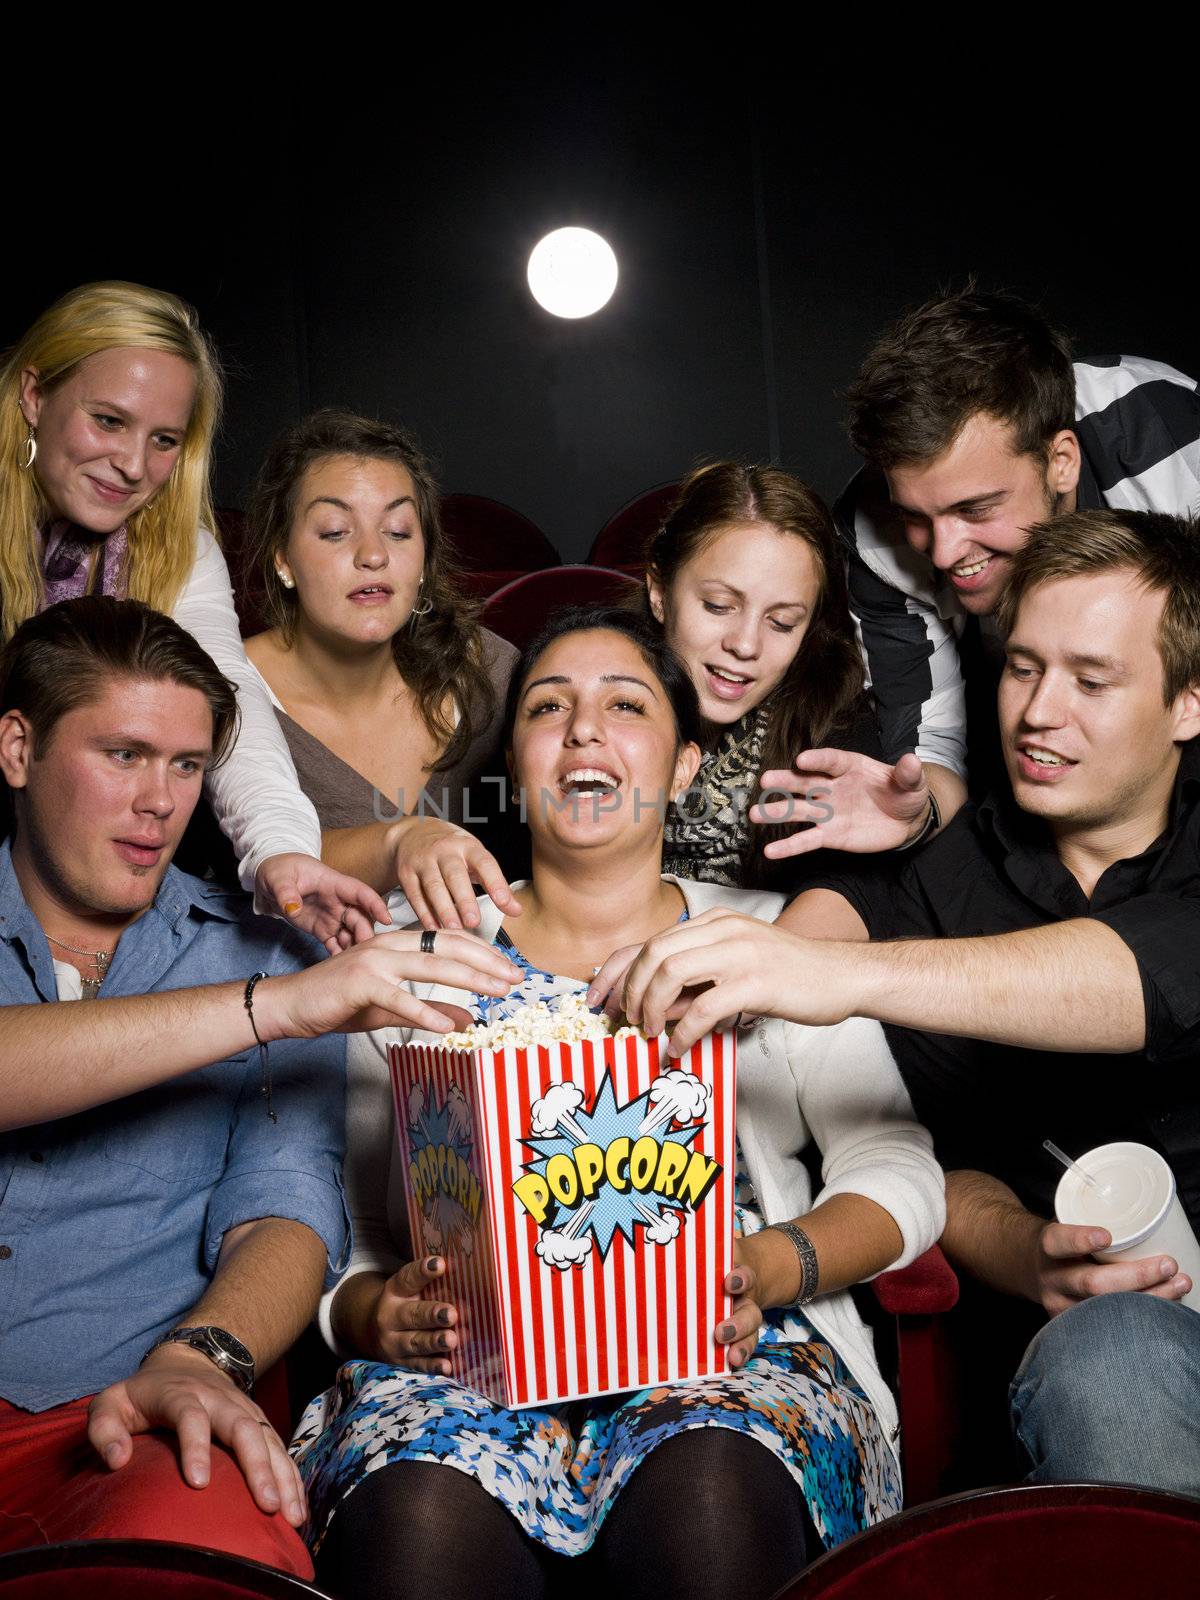 Group of young spectators eating popcorn at the movie theater